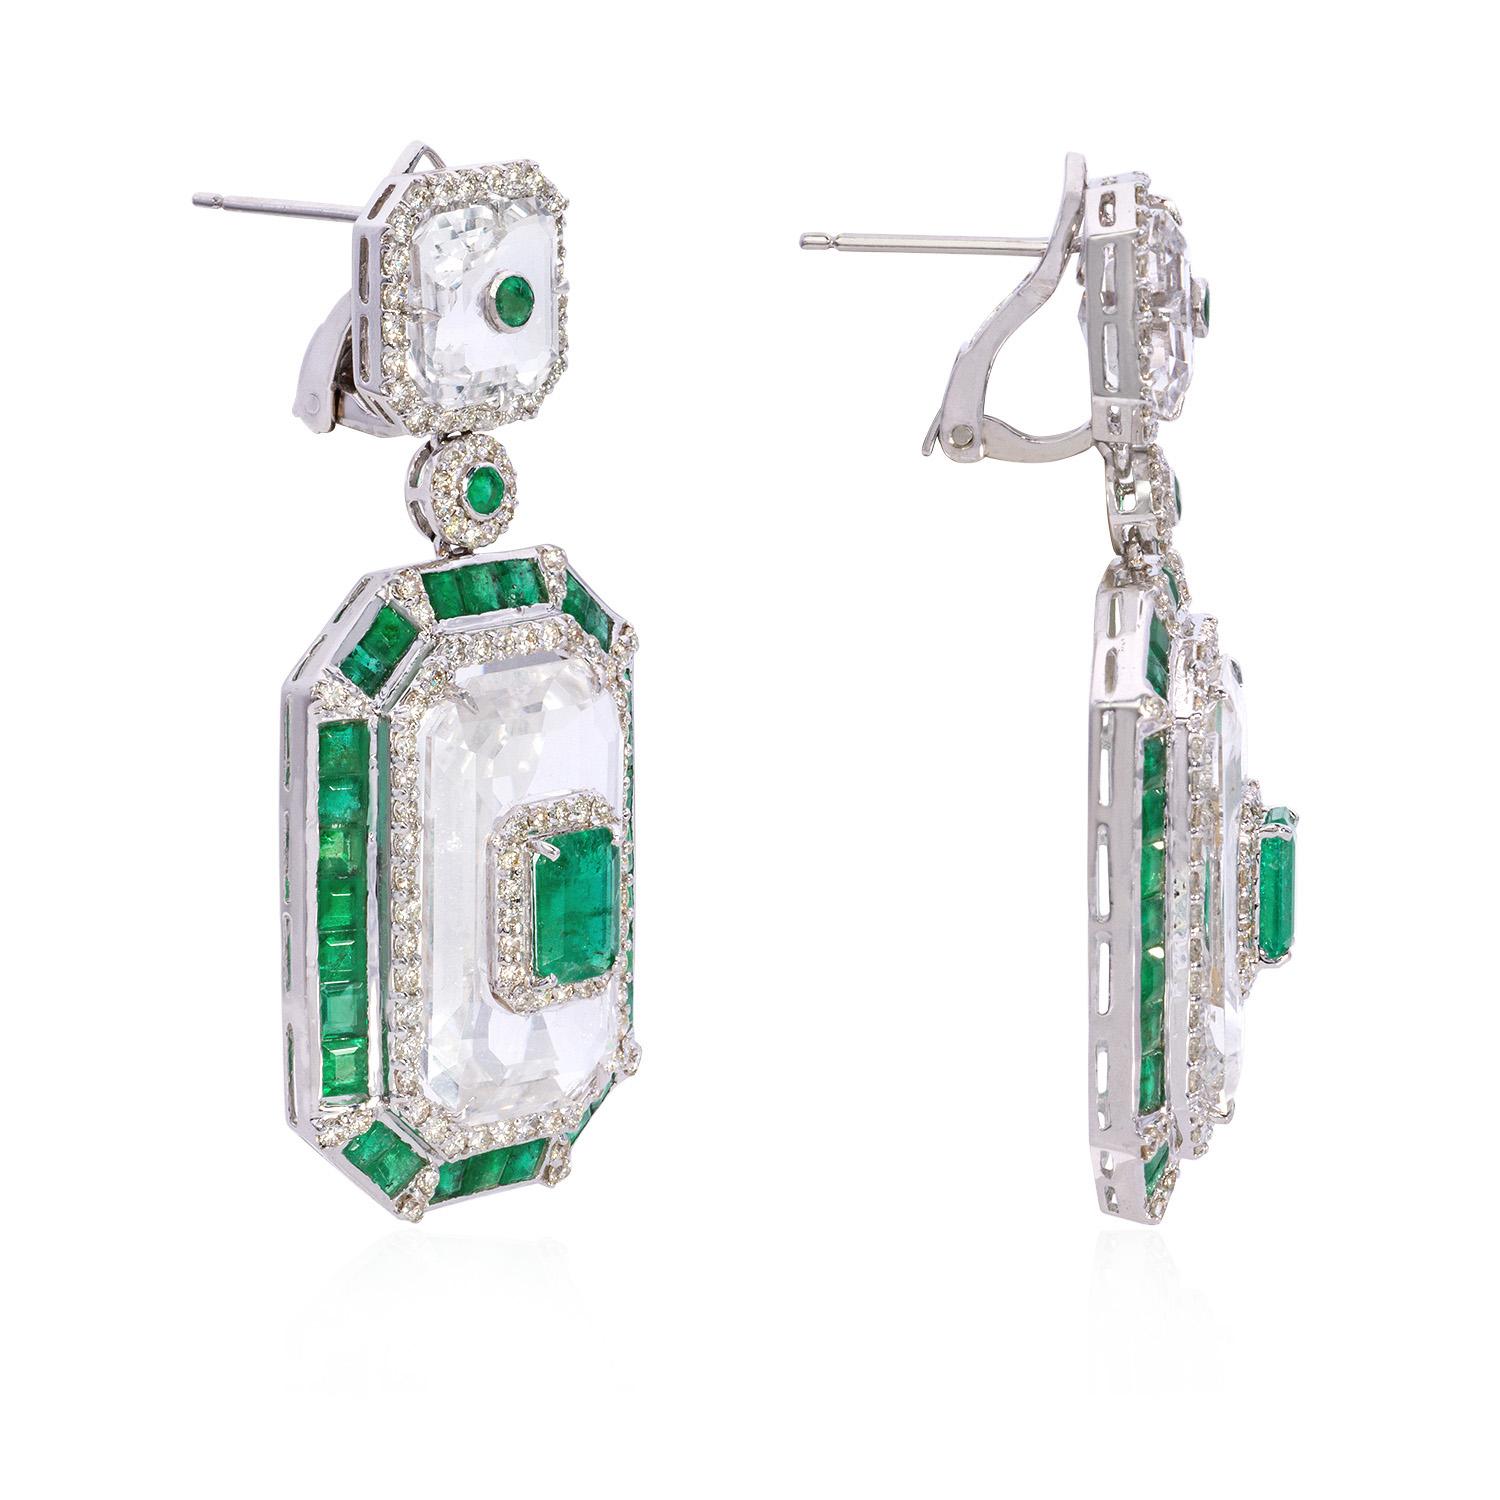 These emerald earrings boast a lush green hue that will add a touch of glamour to your look. The emeralds are complemented perfectly by round diamonds, which are expertly cut and set for maximum sparkle. The crystals add an extra shine to the